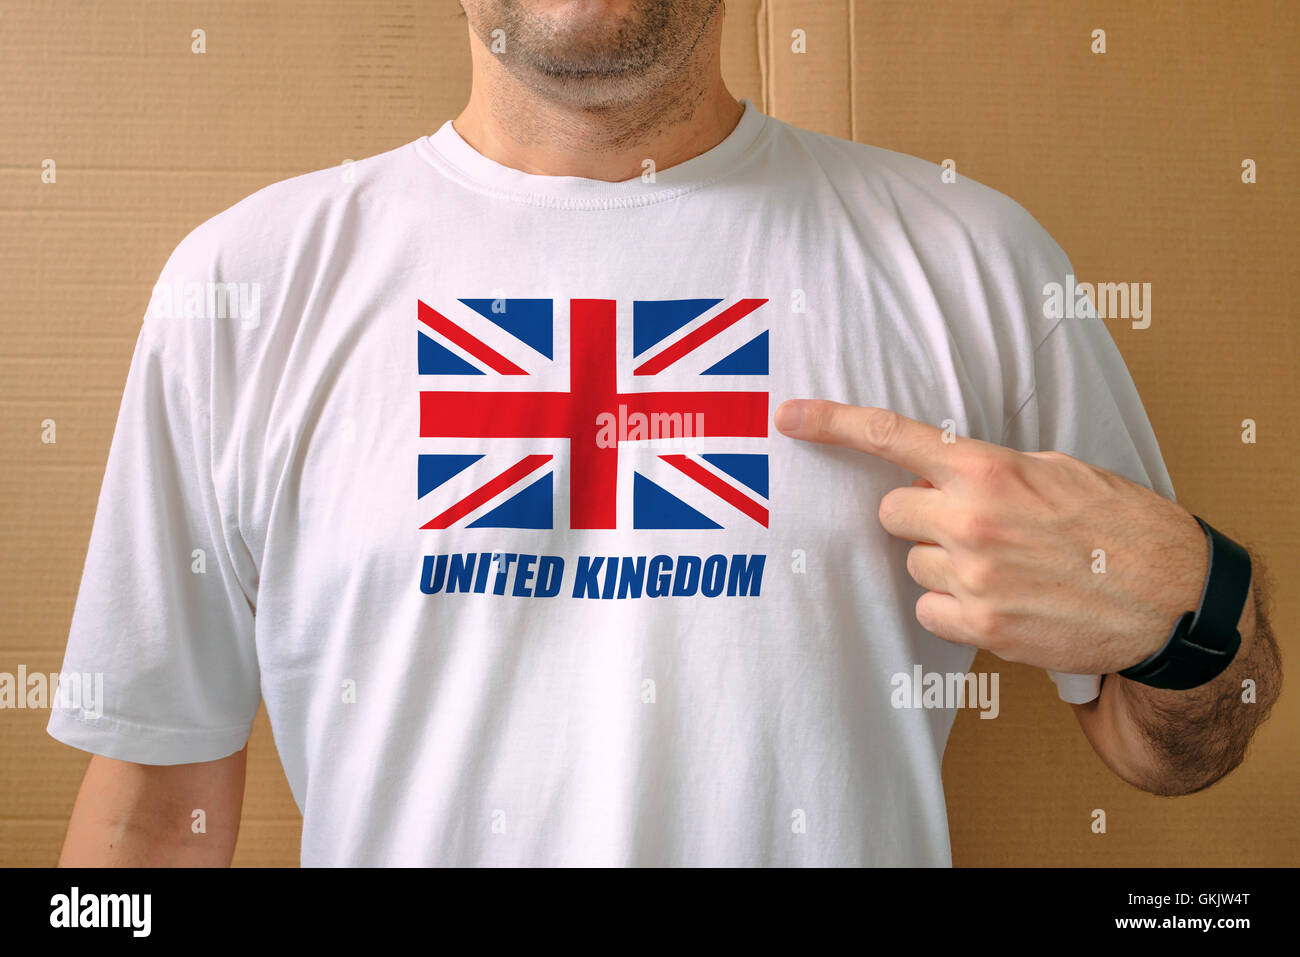 Handsome man proudly wearing white t-shirt with United Kingdom flag printed on chest, concept of patriotism, national pride and Stock Photo